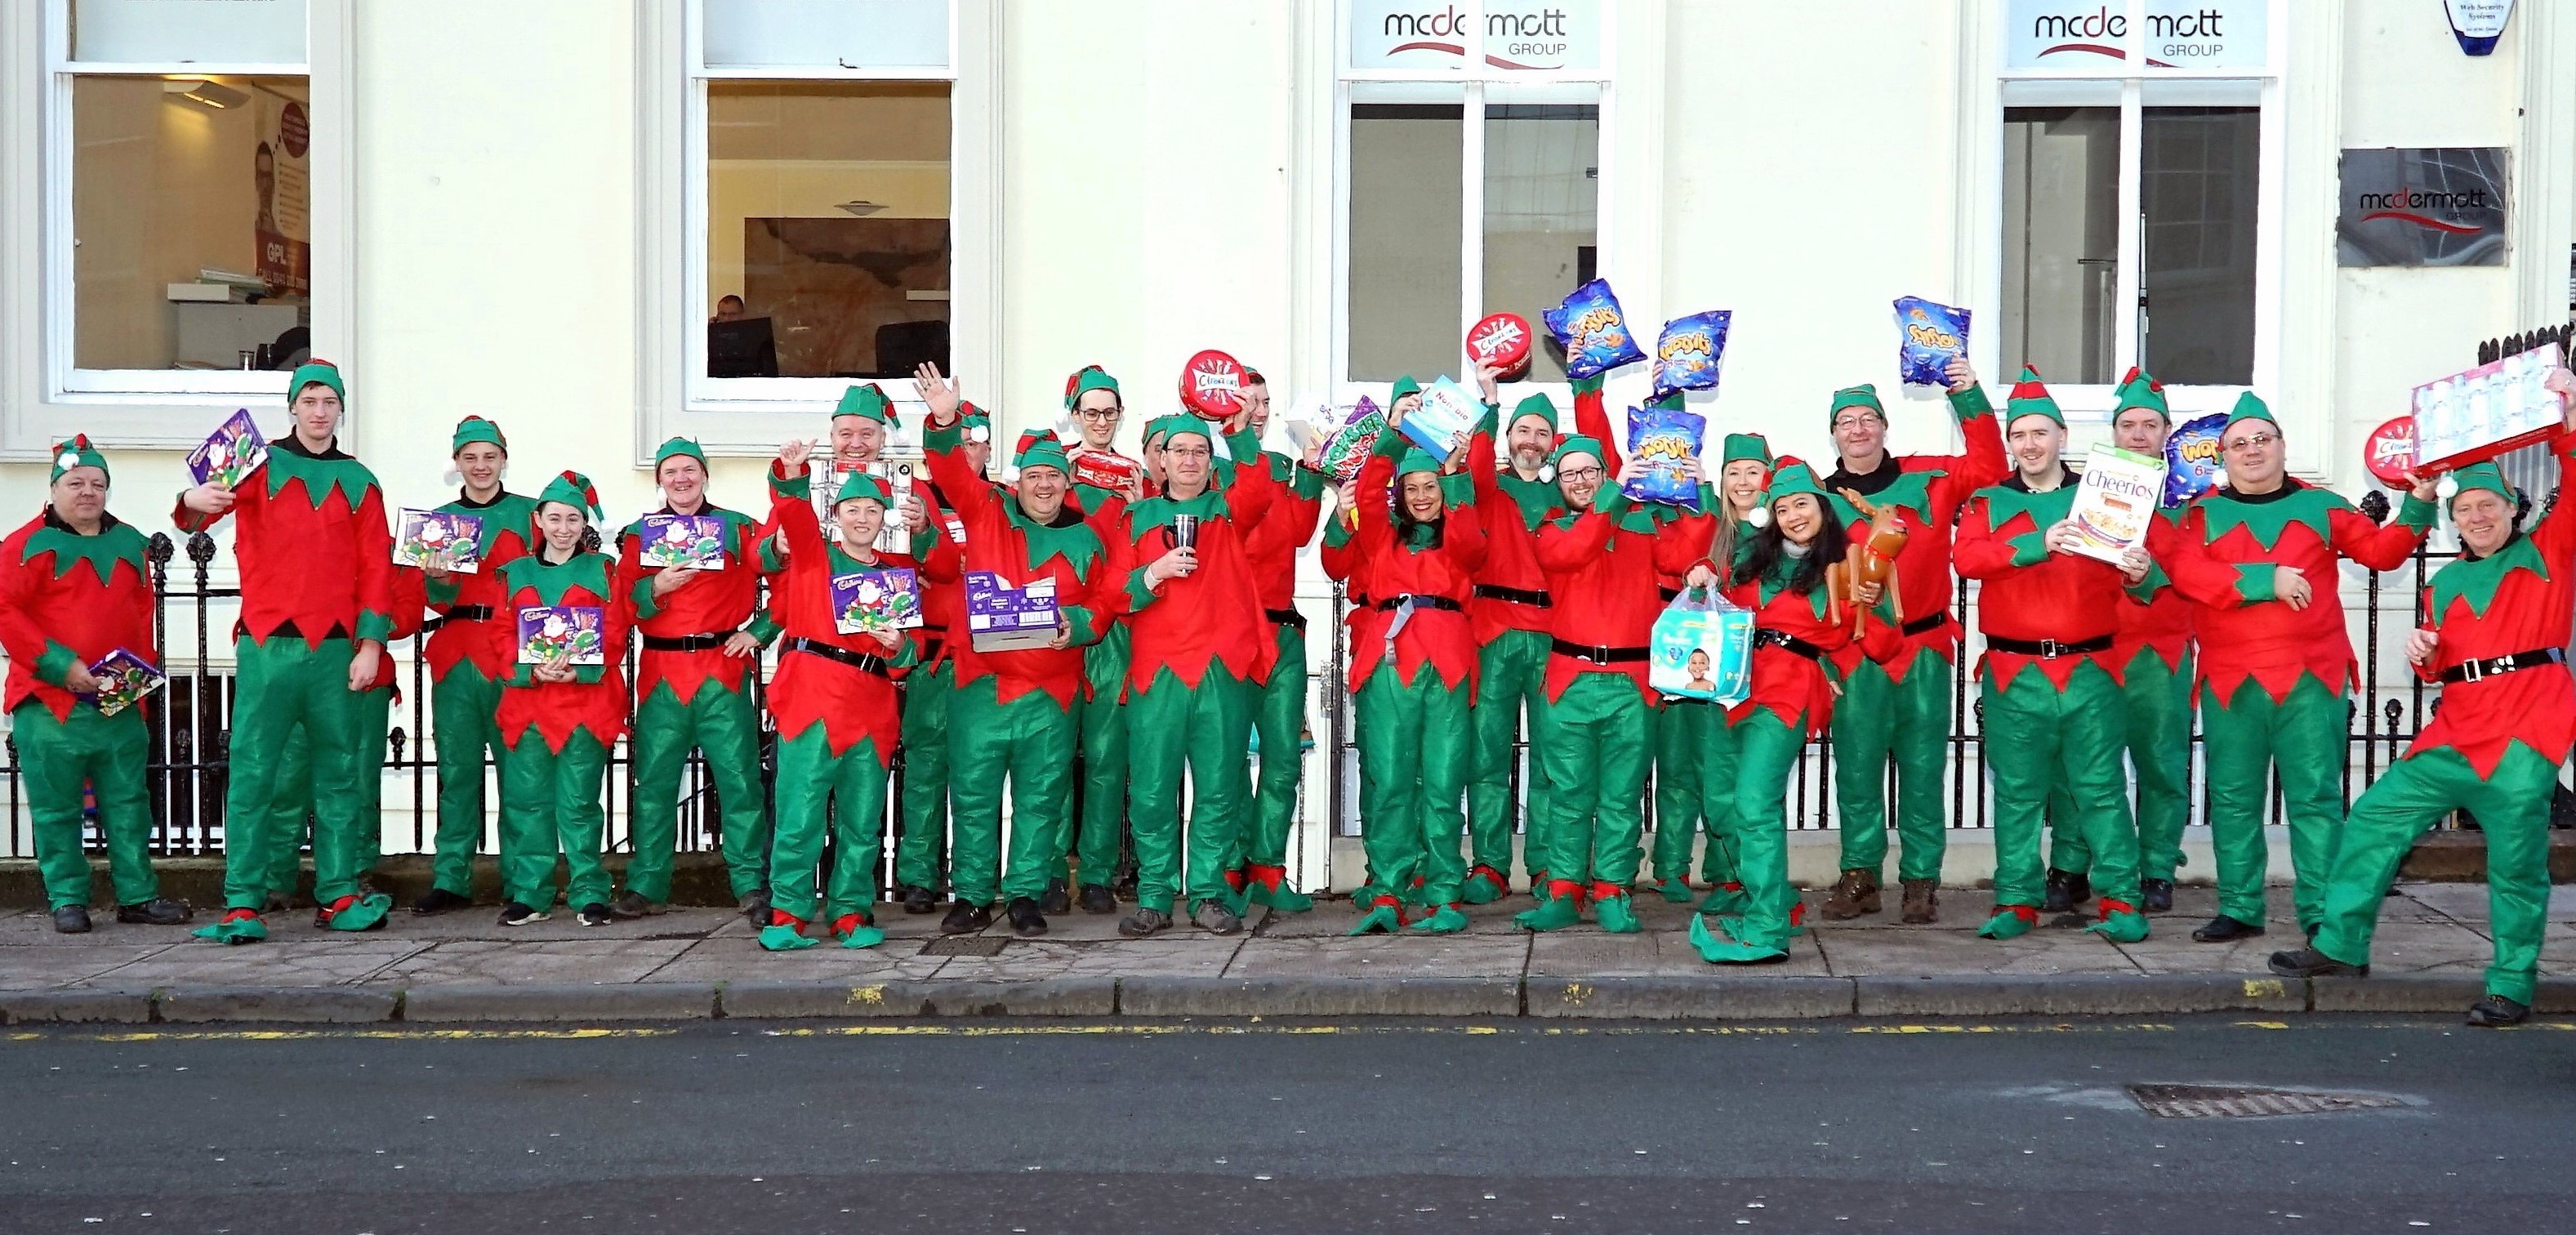 McDermott’s Christmas elves make special deliveries for families and young carers